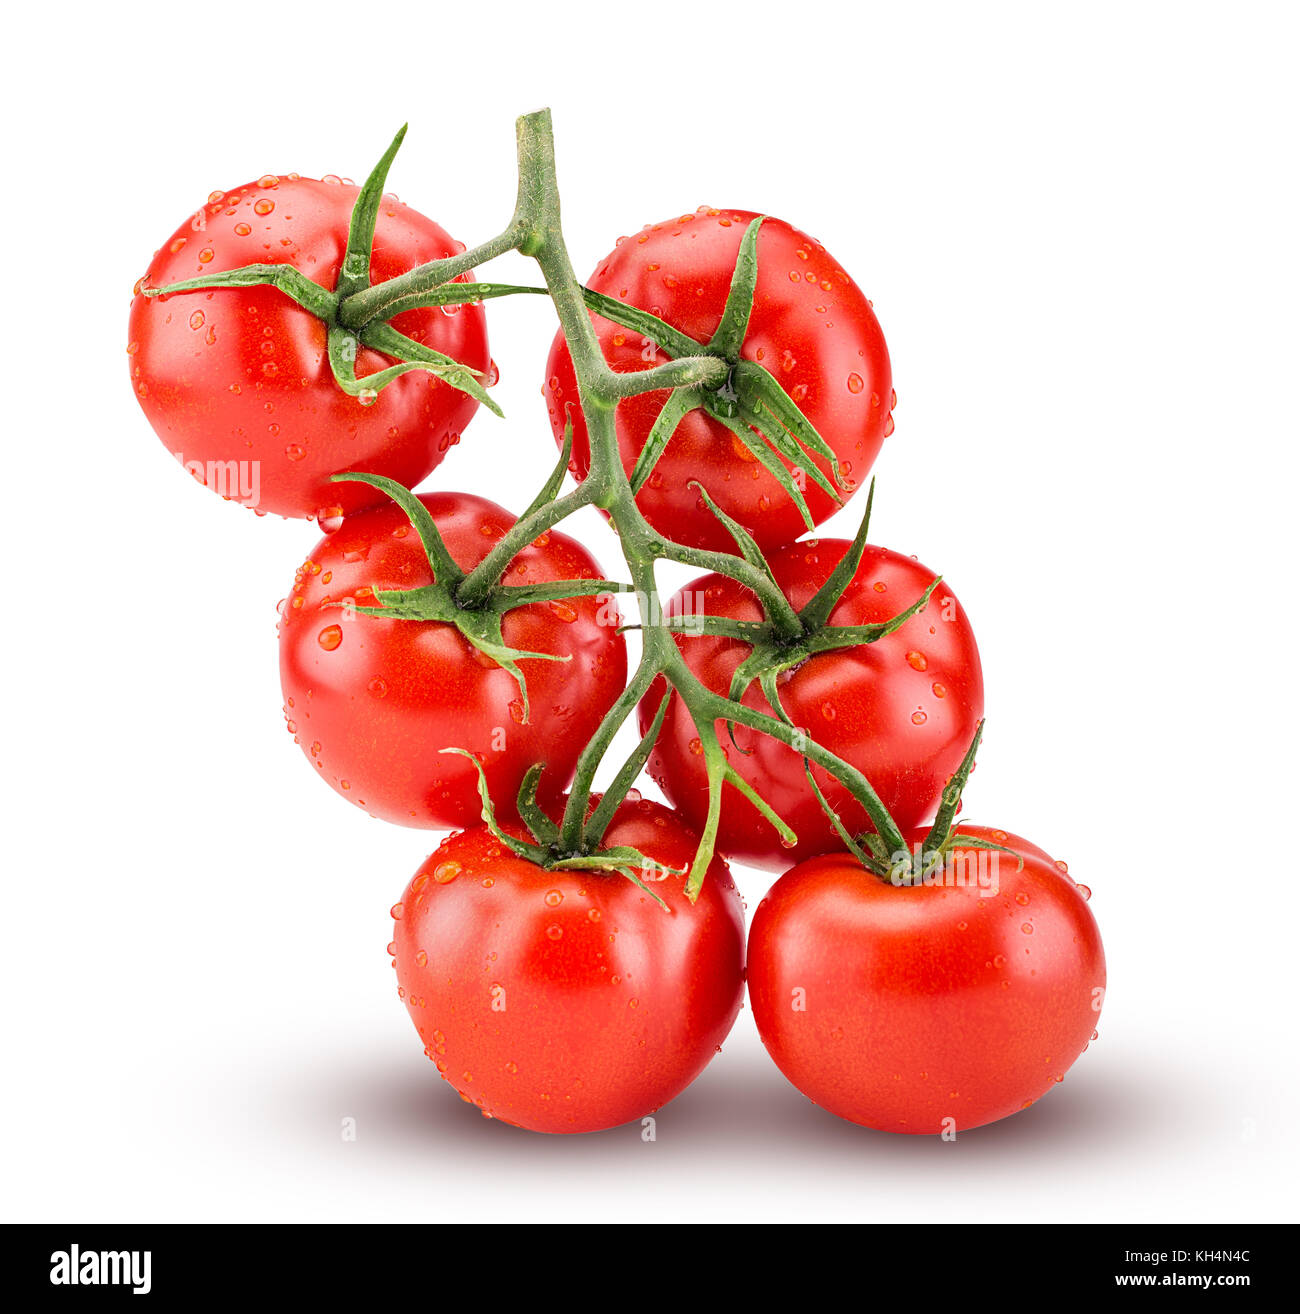 Big branch of fresh red tomato with green leaves with water drops isolated on white background Clipping Path. Full depth of field. Stock Photo